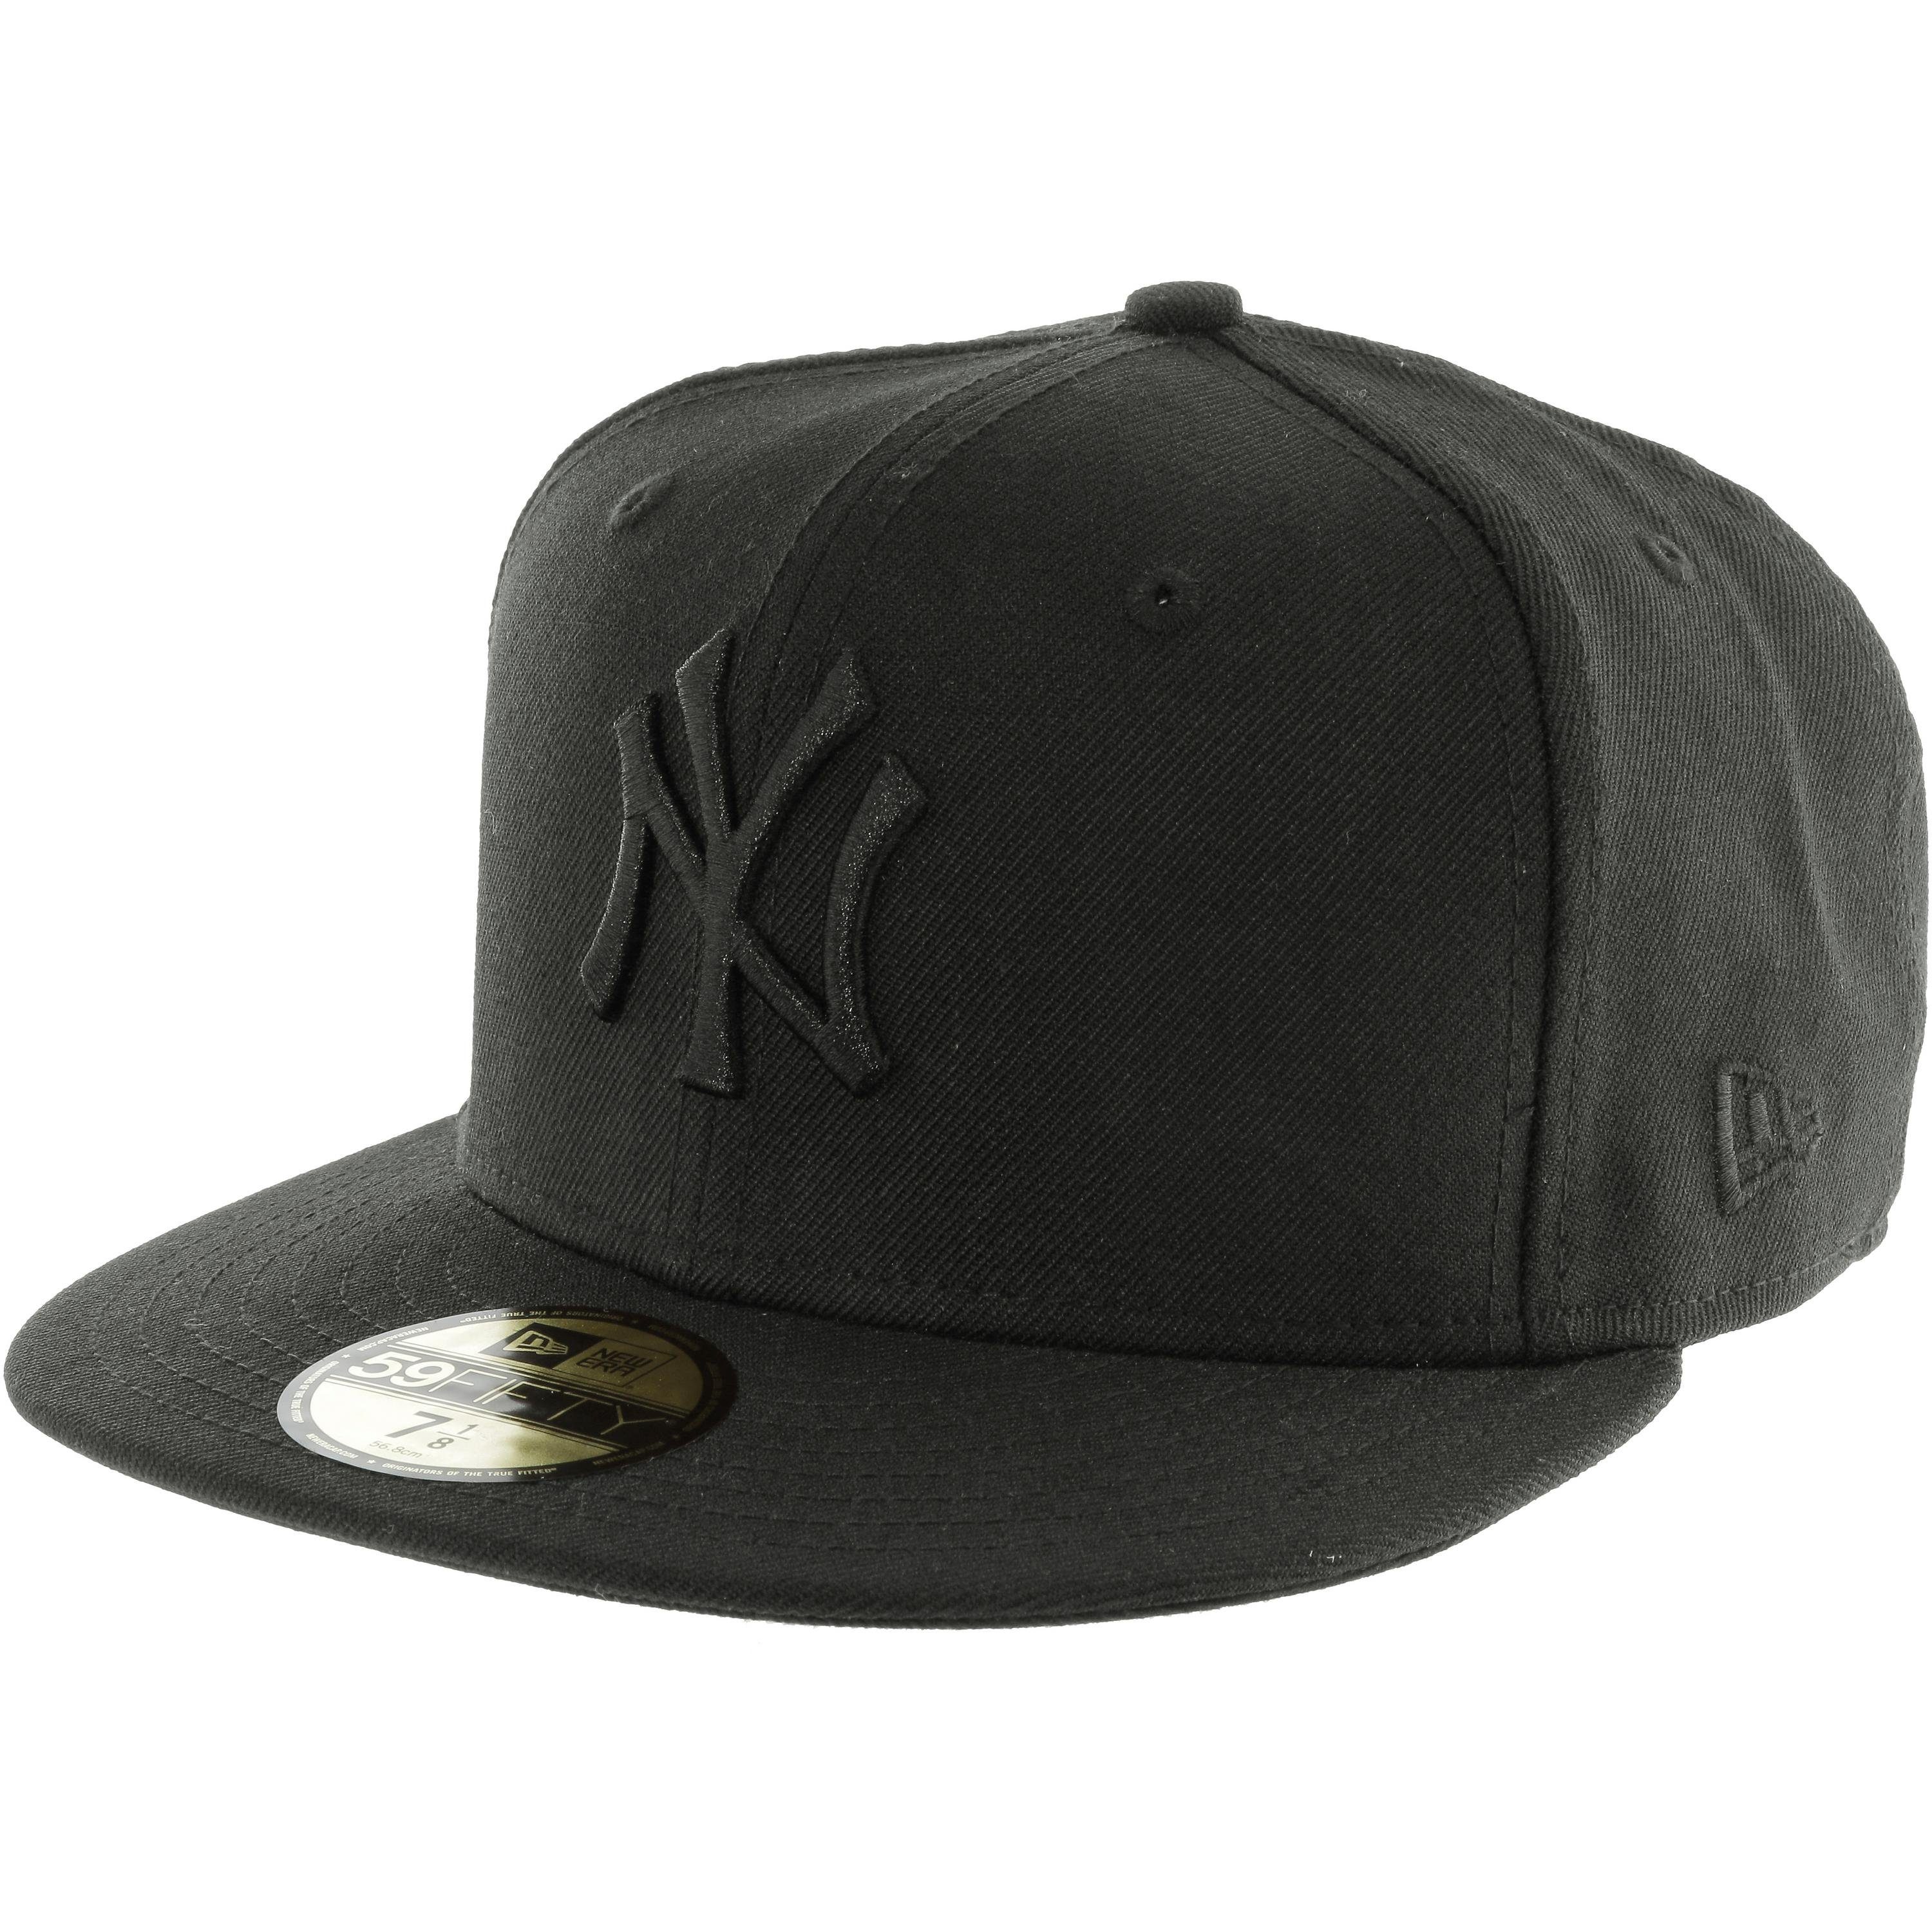 New Cap schwarz 59fifty Yankees Fitted NY Era